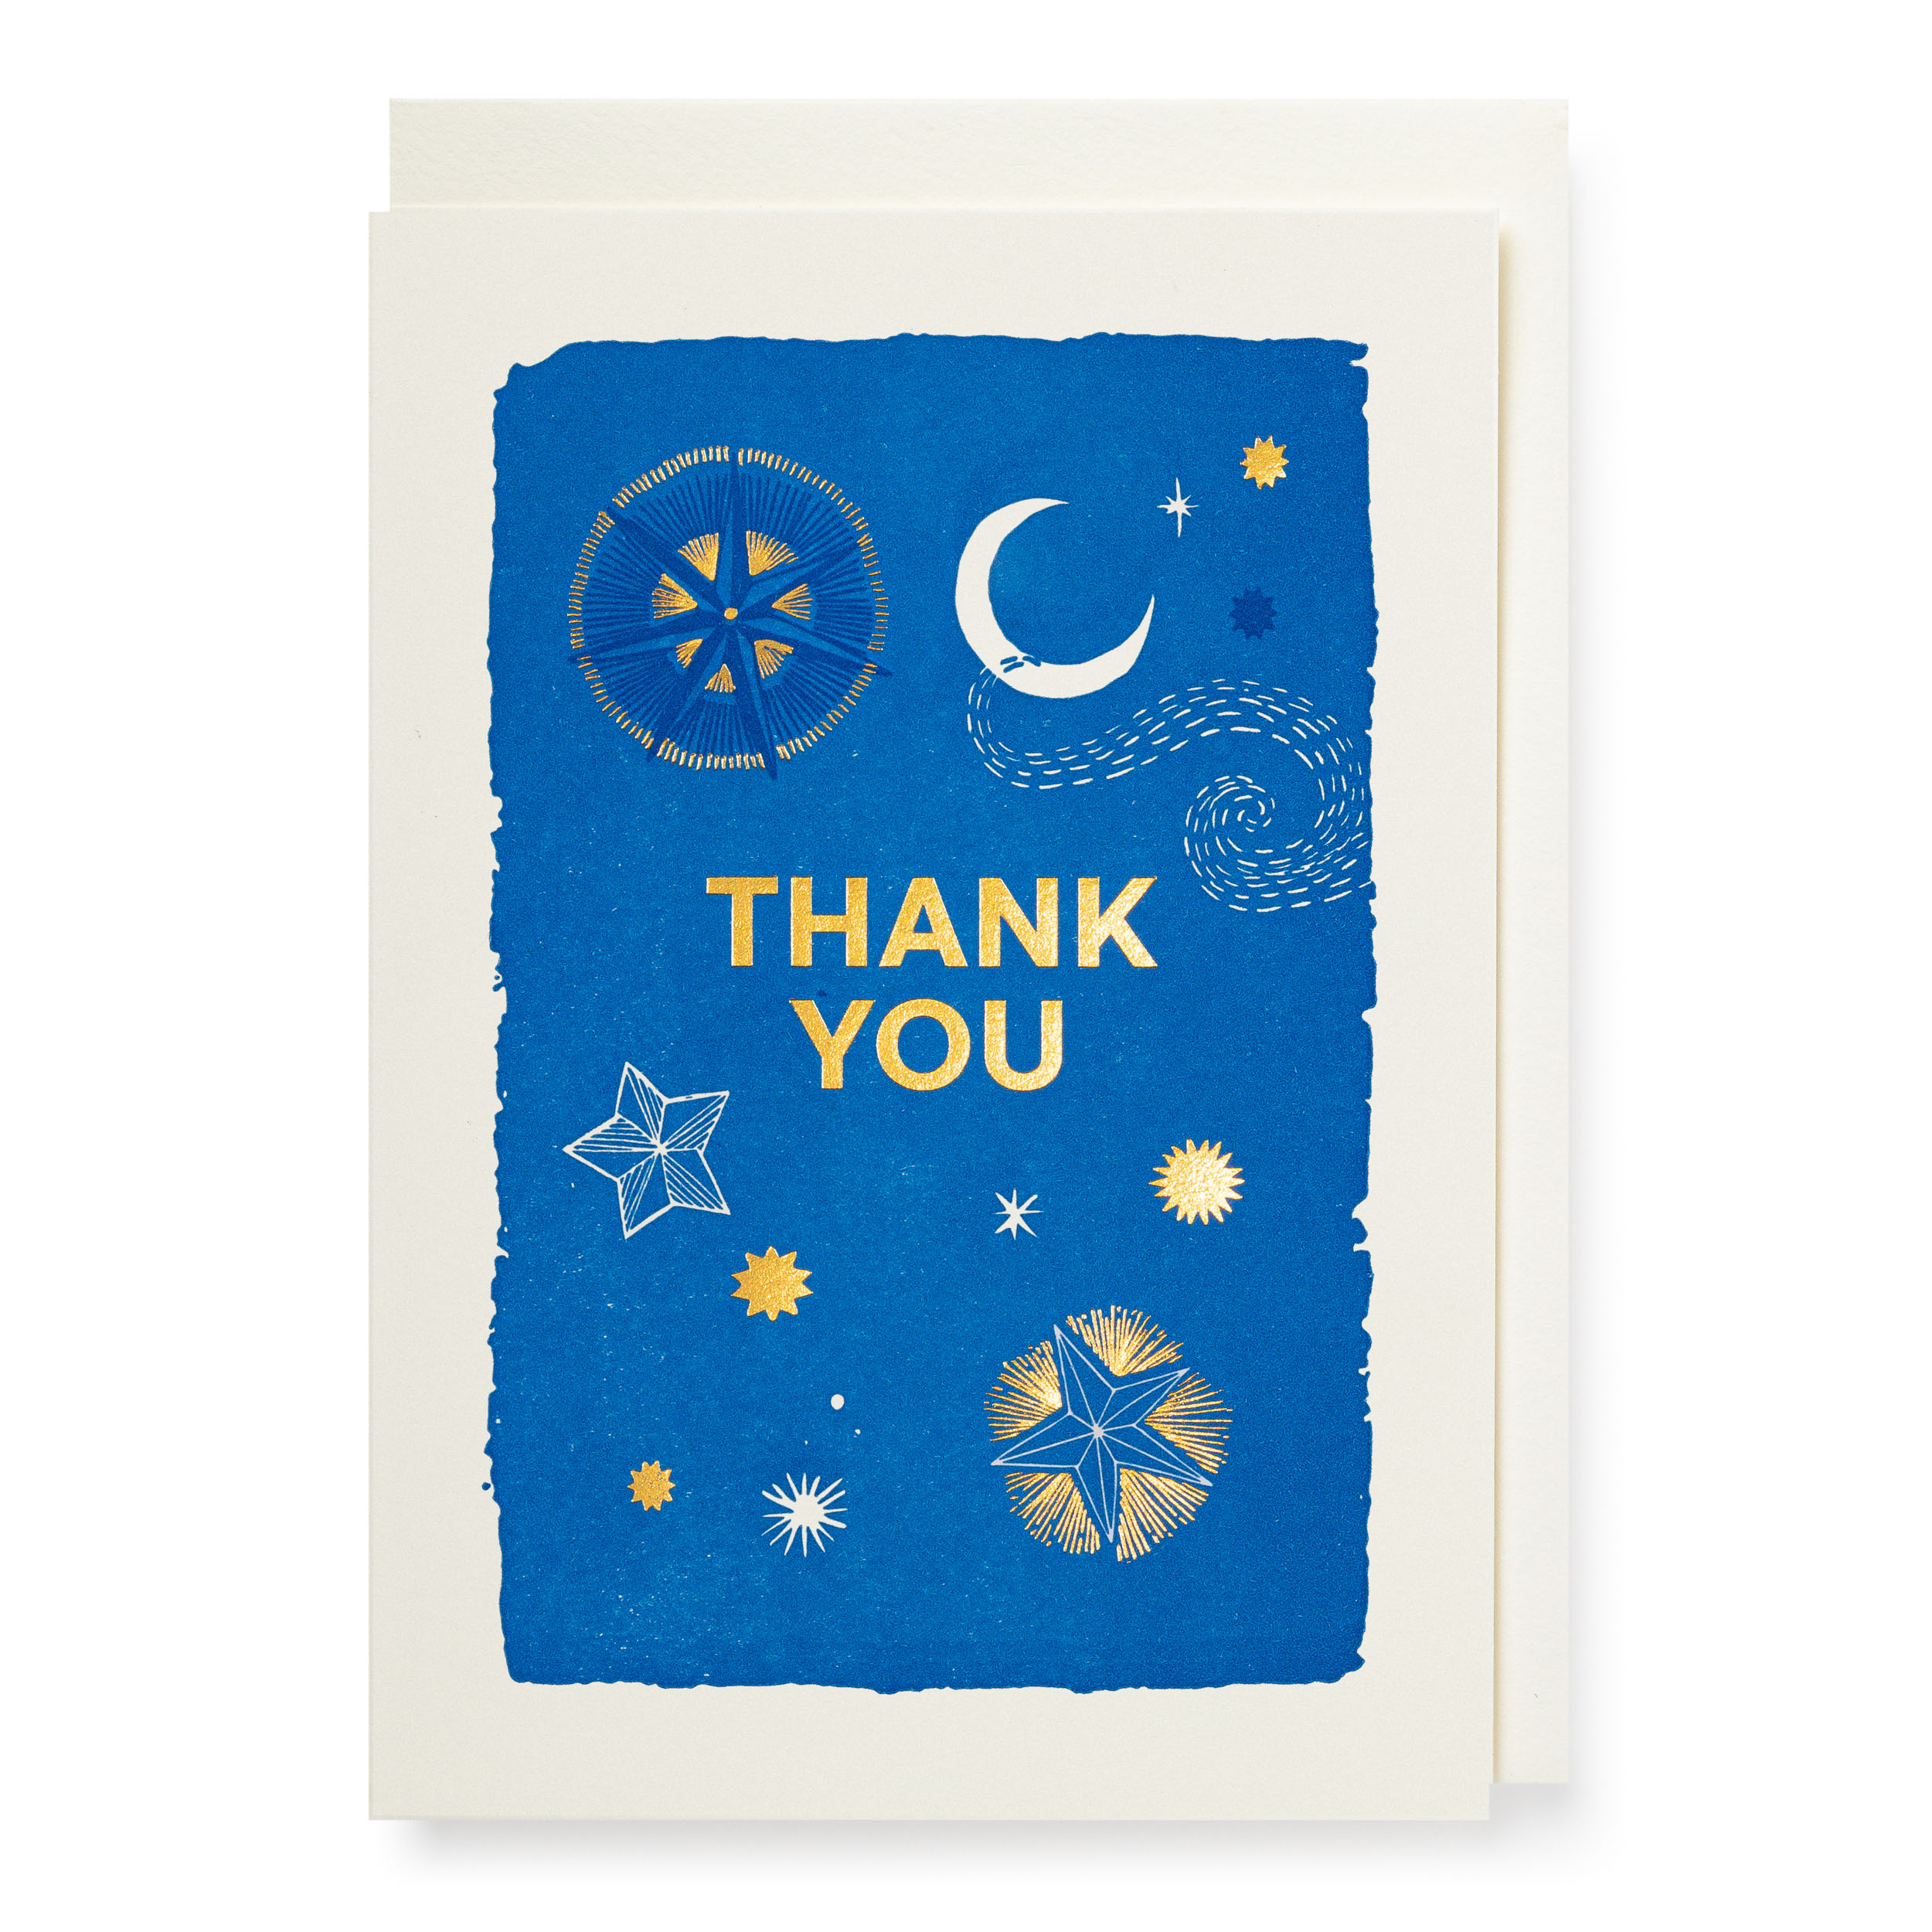 Thank You Stars - Notelets Singles - Ariane Butto - from Archivist Gallery 